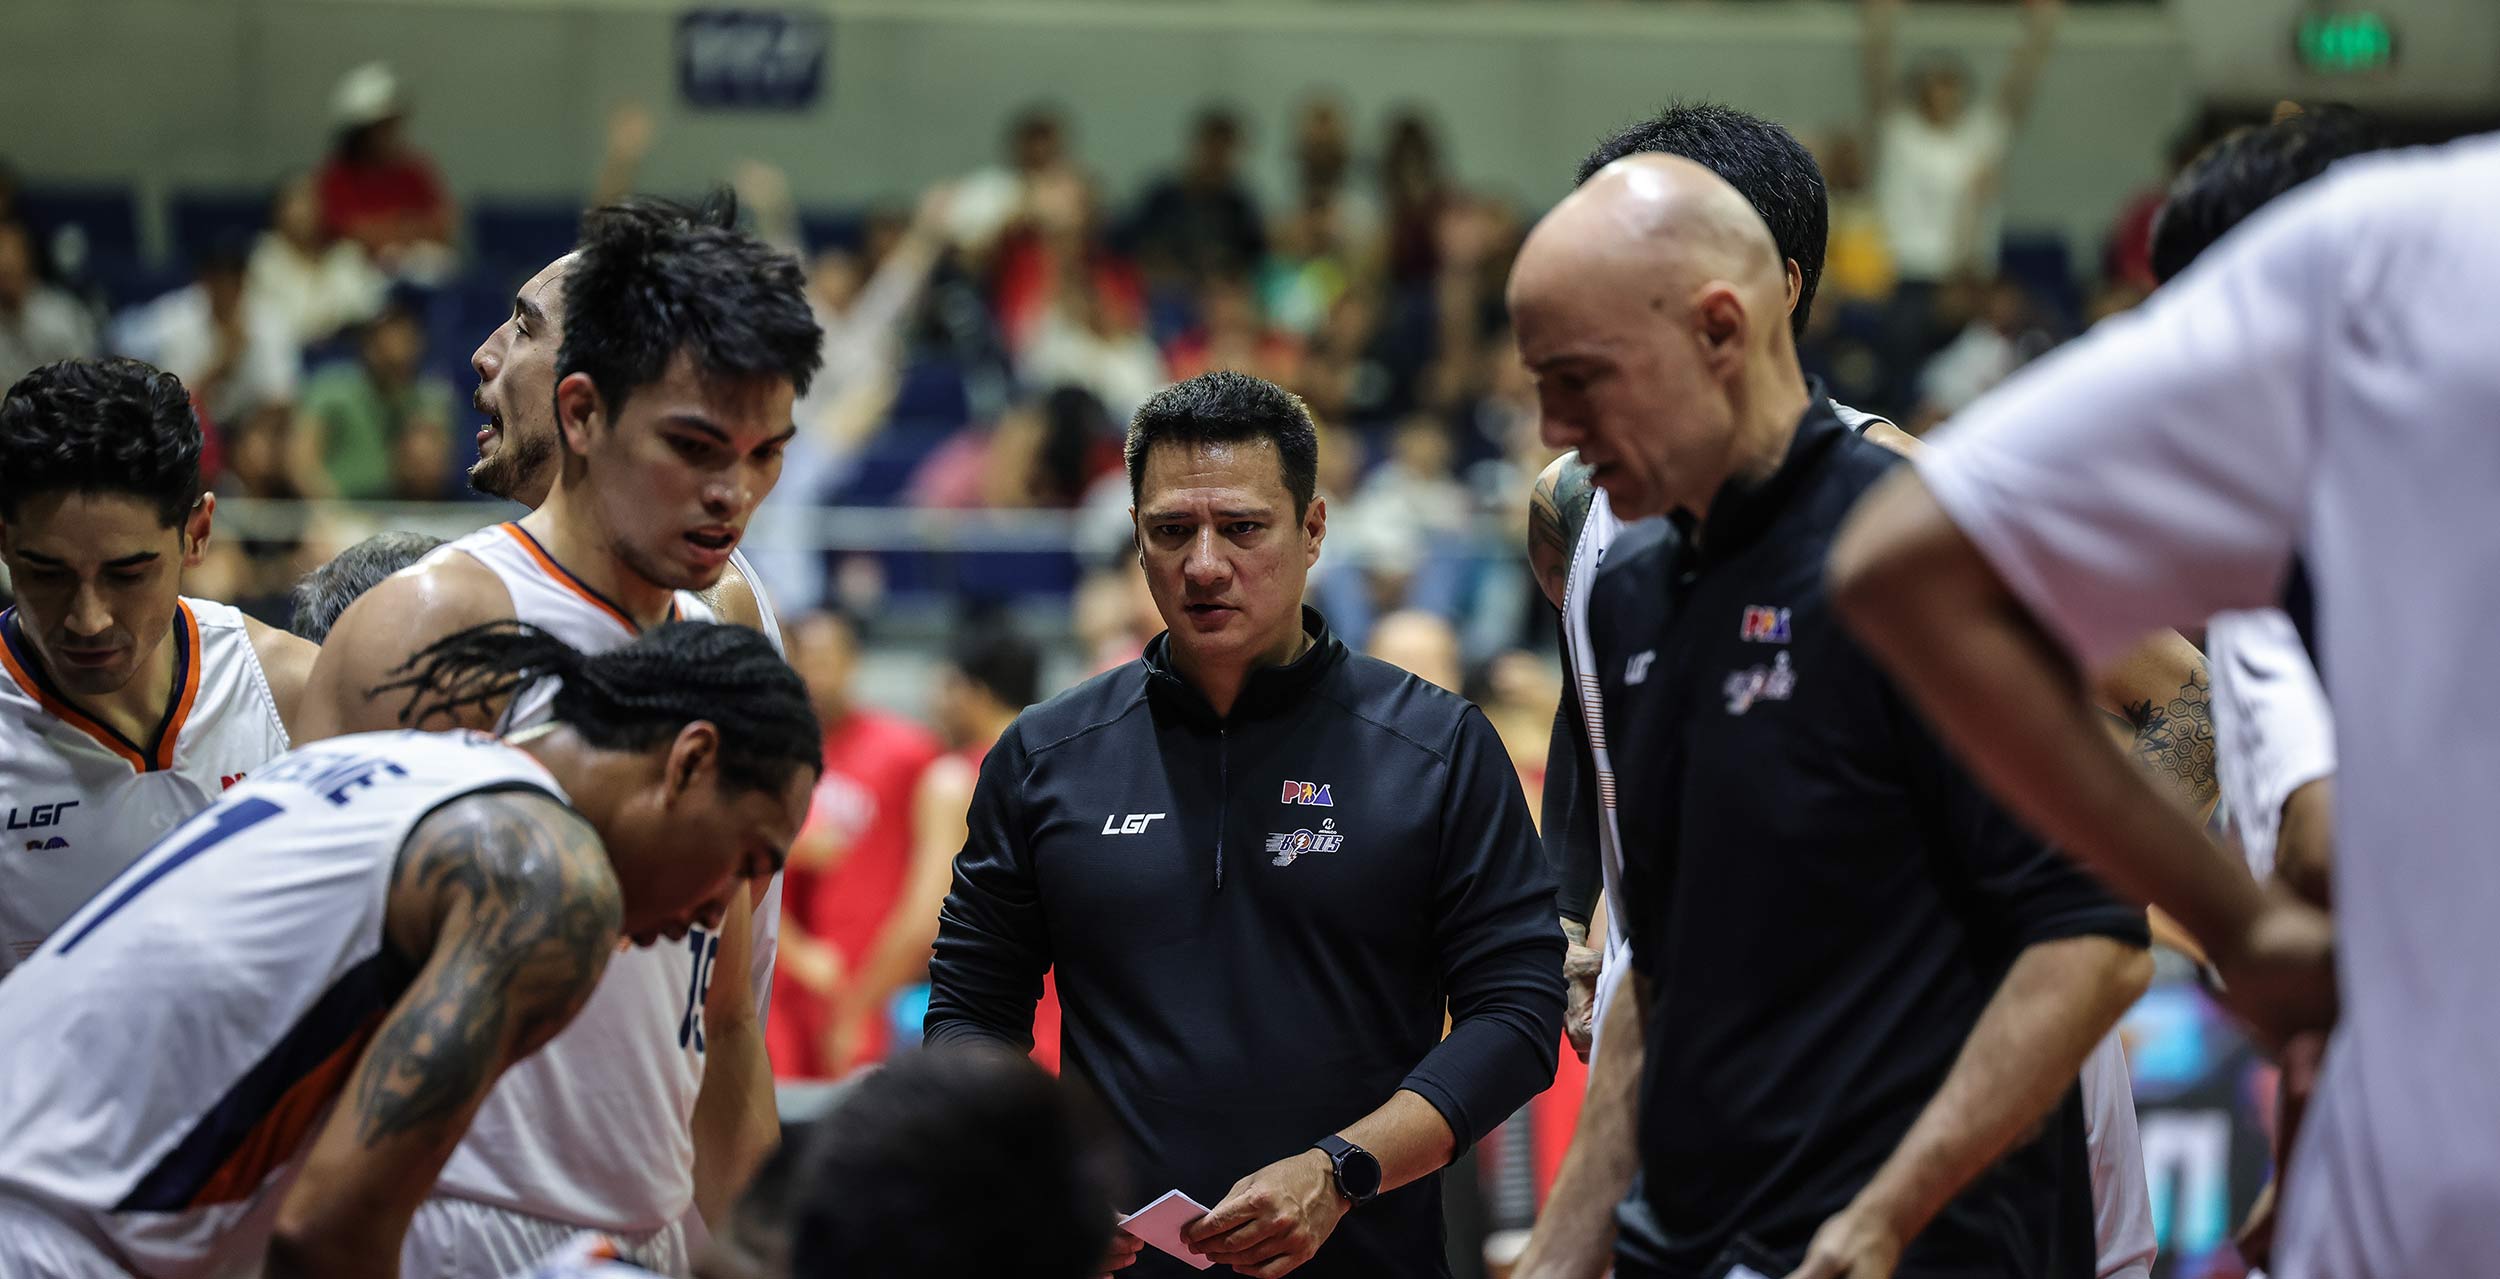 Meralco Bolts coach Luigi Trillo during the PBA Philippine Cup semifinals Game 6 against Ginebra Gin Kings